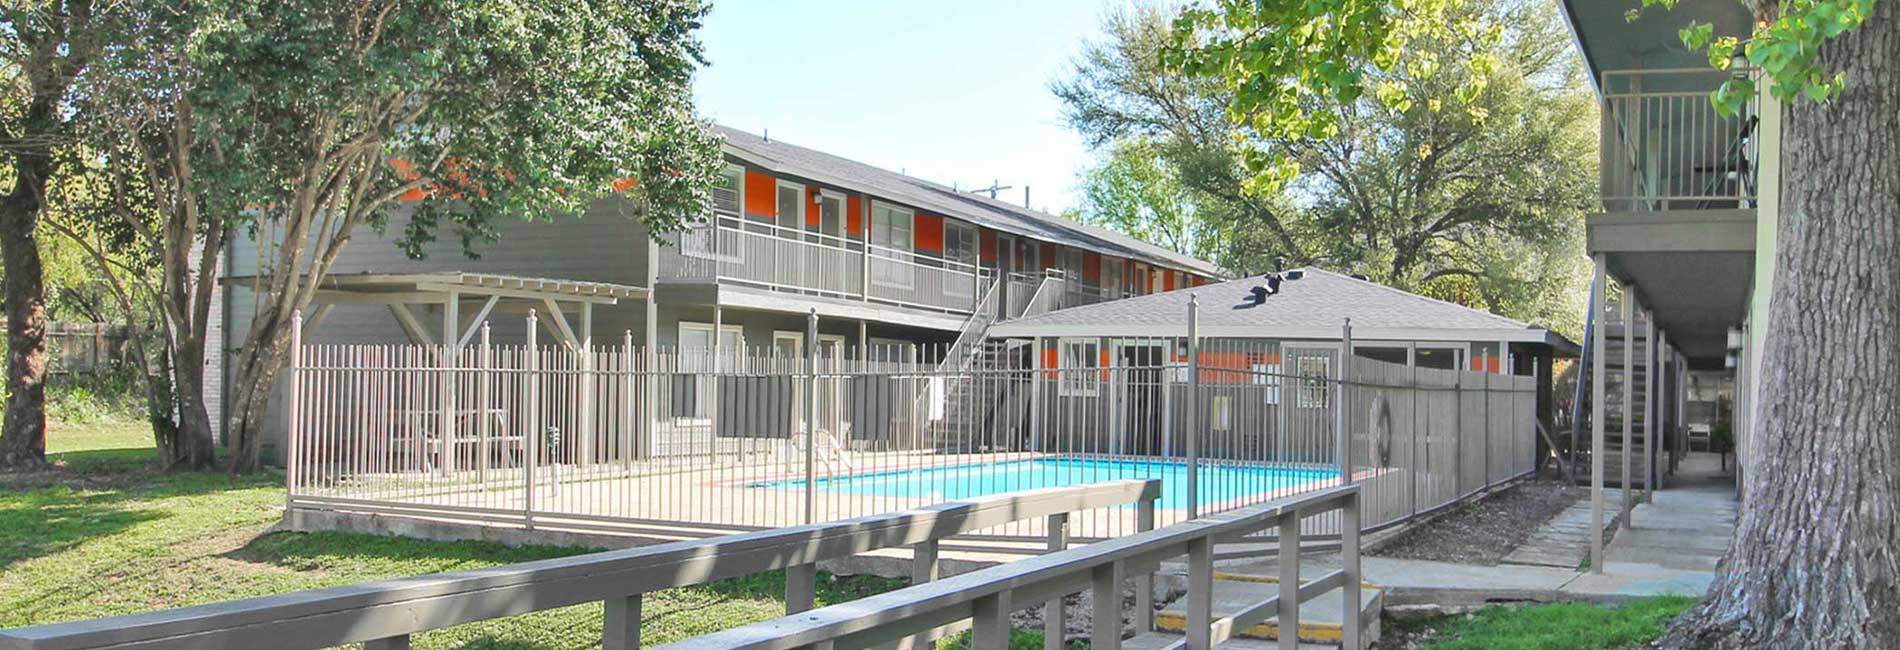 Sungate Apartments with Gated Swimming Pool